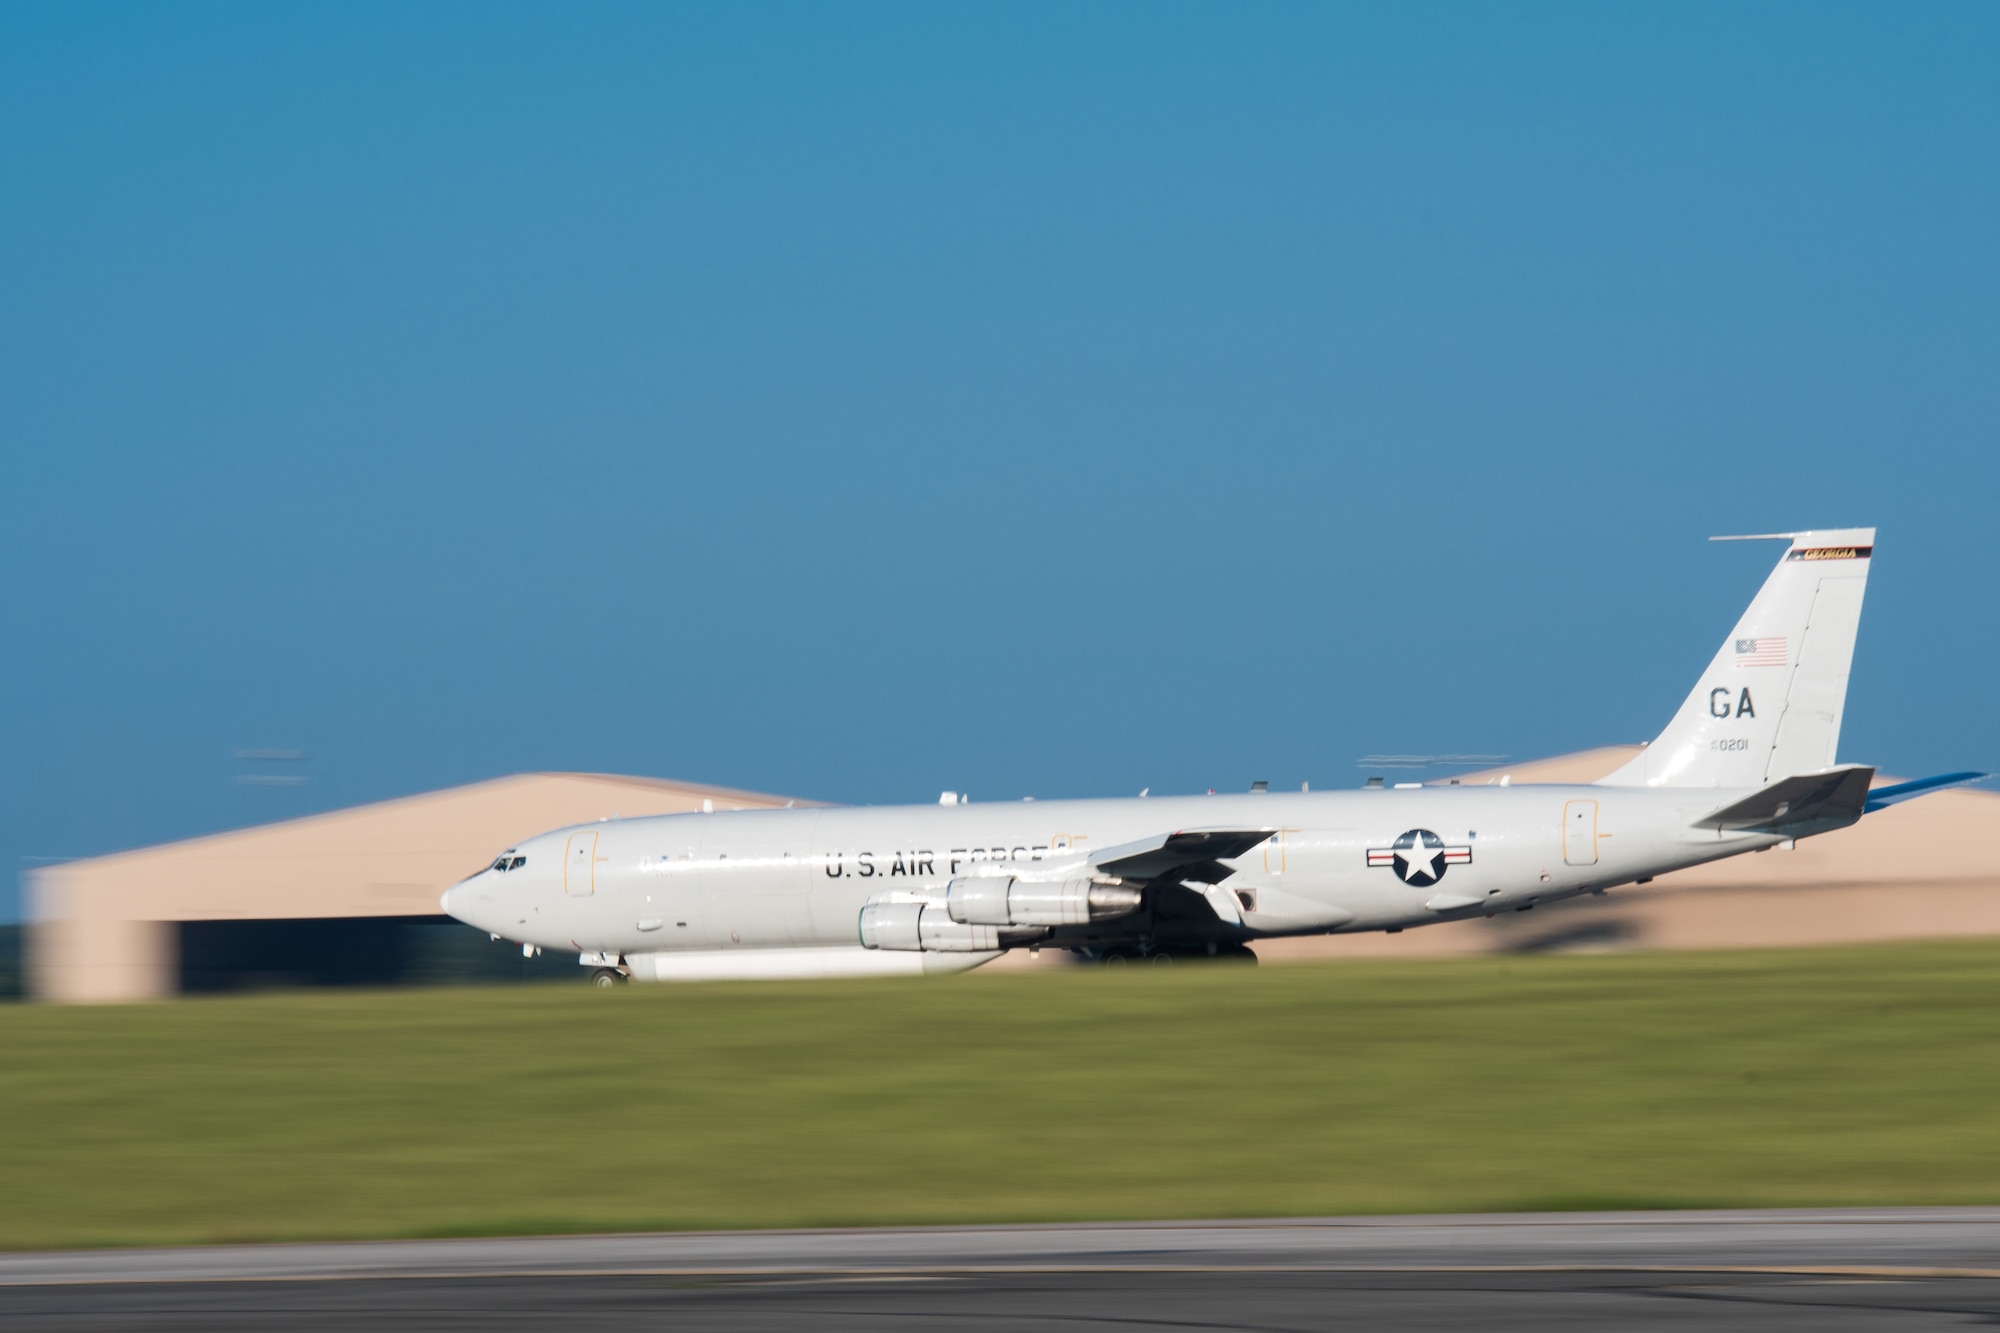 An E-8C Joint STARS taxis down the runway during a morning mission at Robins Air Force Base, Ga., July 20, 2017. Team JSTARS; consisting of the 116th Air Control Wing (ACW), Georgia Air National Guard, active-duty 461st ACW and Army JSTARS, provides joint airborne command and control, intelligence, surveillance, and reconnaissance support over land and water to combatant commanders around the globe. The Total Force Integration unit operates the world’s only Joint STARS weapon system based out of Robins Air Force Base. (U.S. Air National Guard photo by Senior Master Sgt. Roger Parsons)